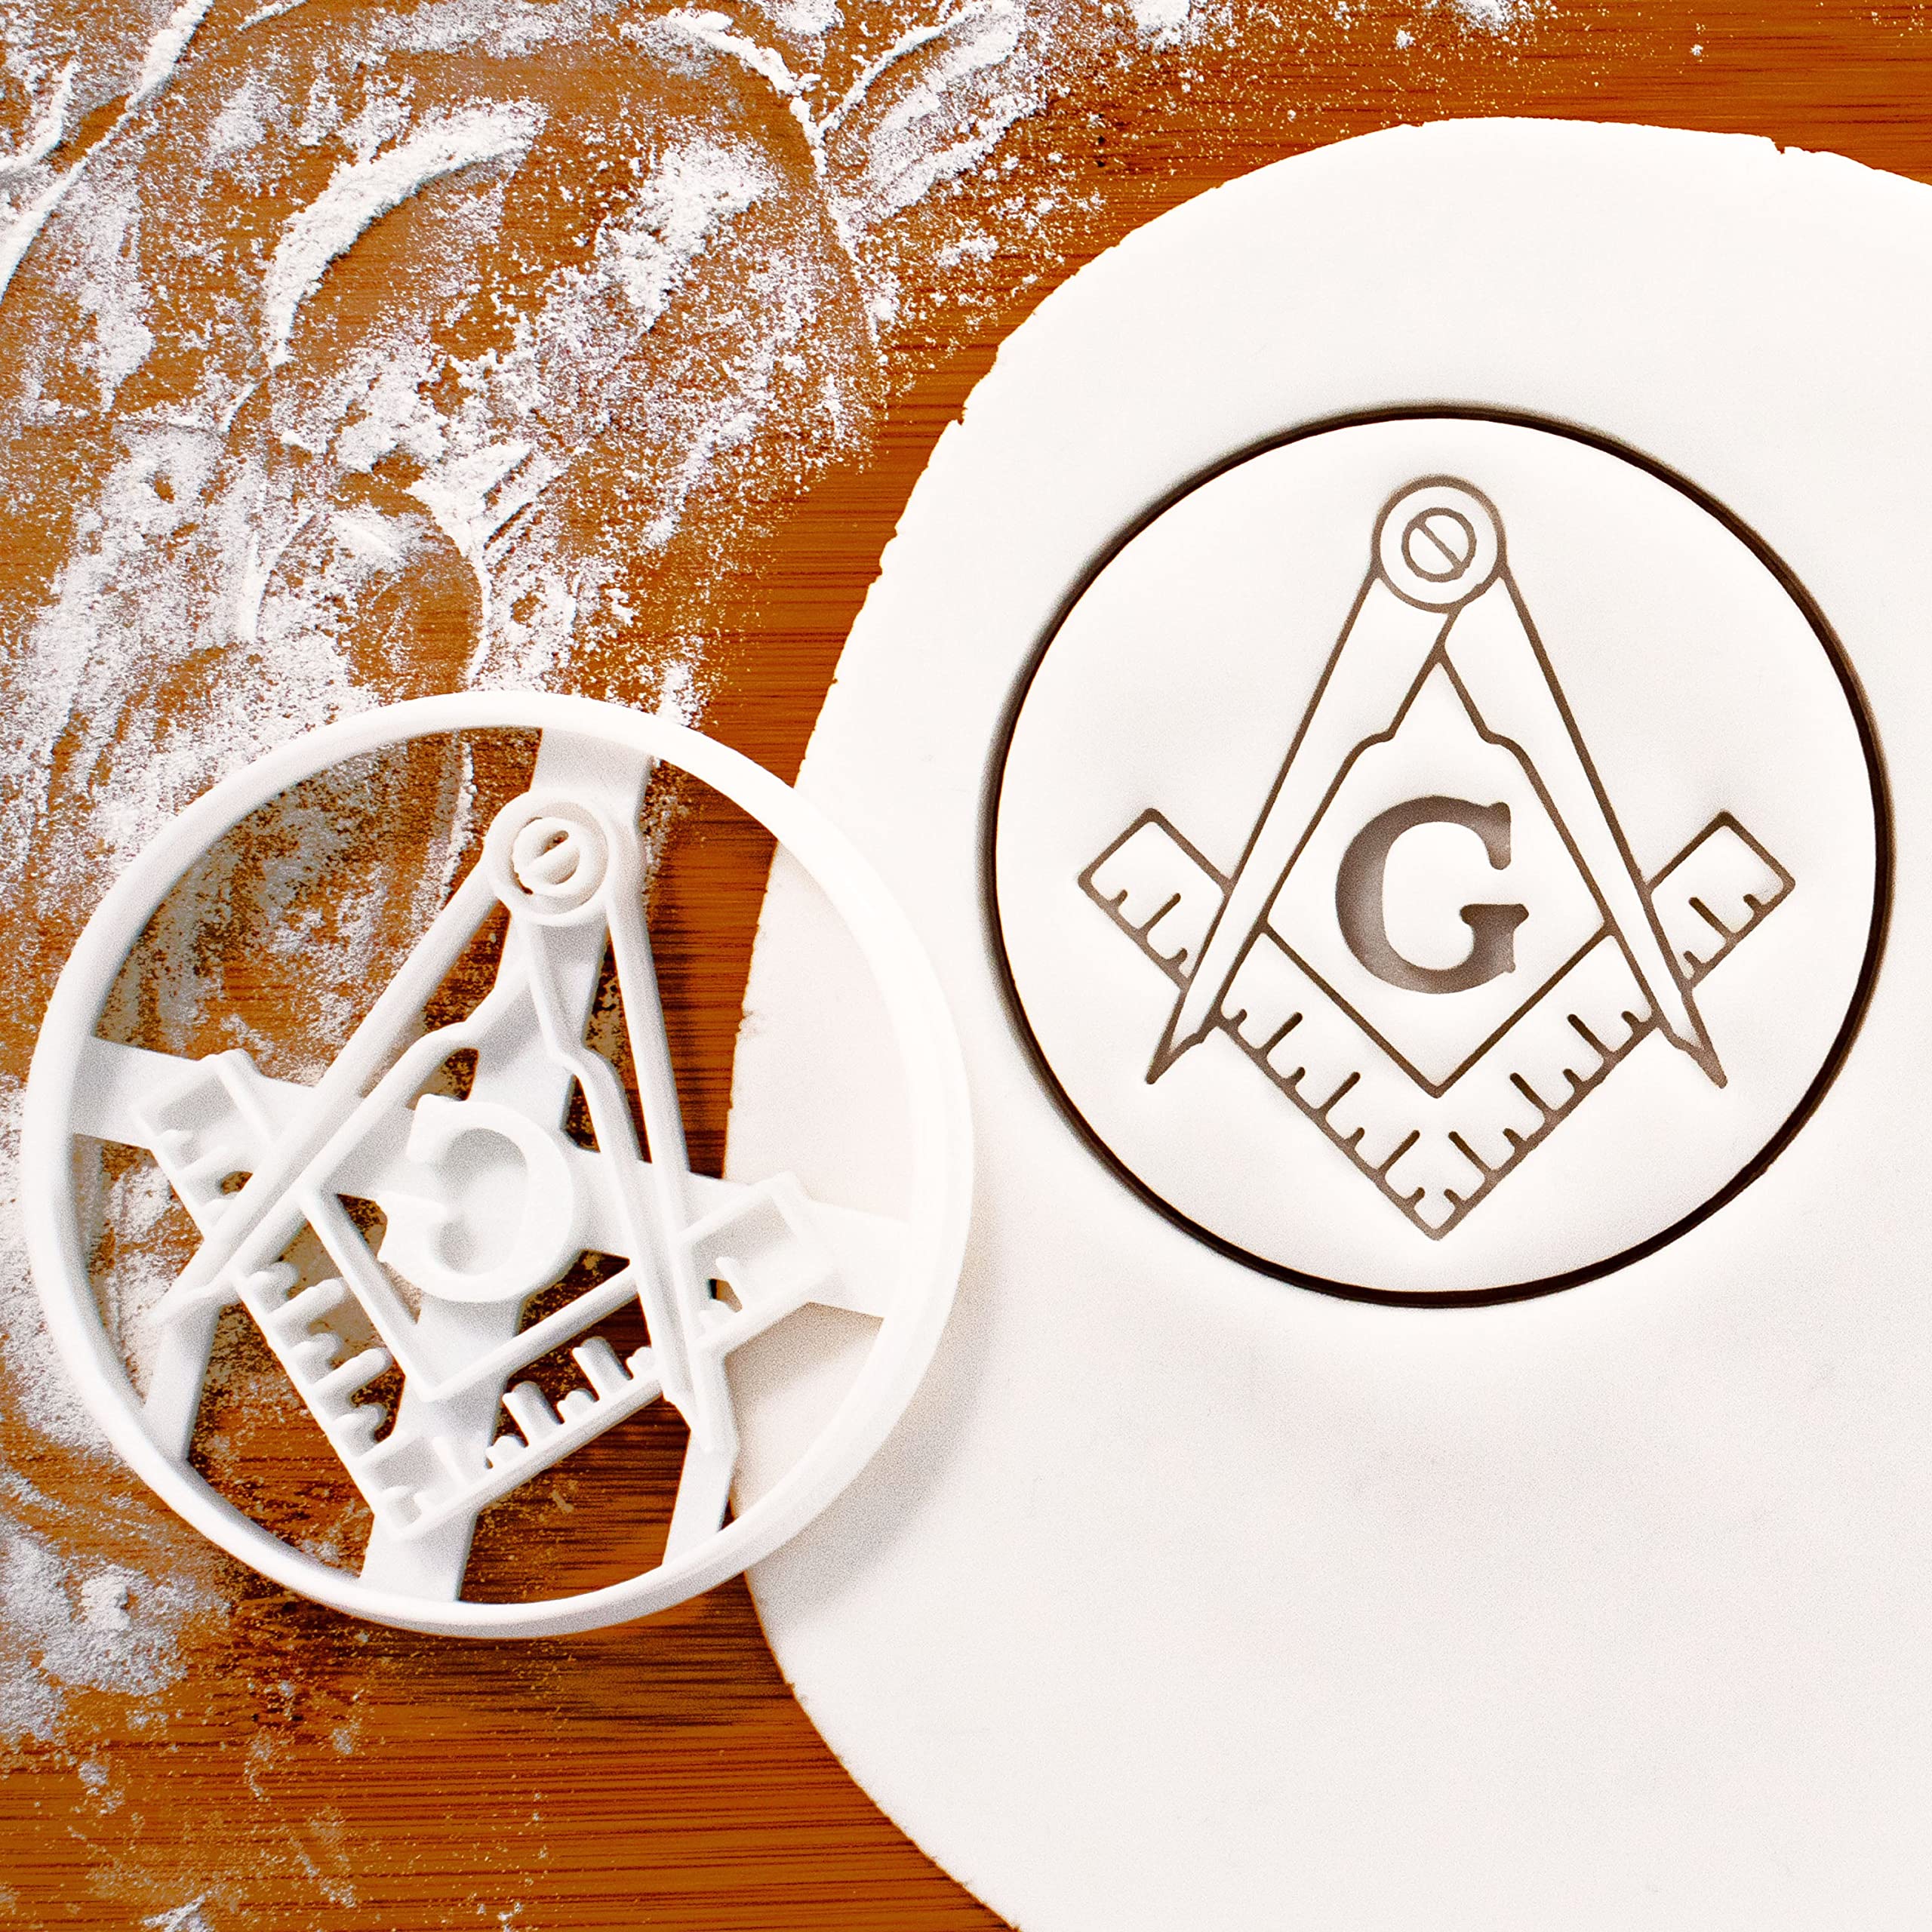 Masonic Square and Compasses cookie cutter, 1 piece - Bakerlogy